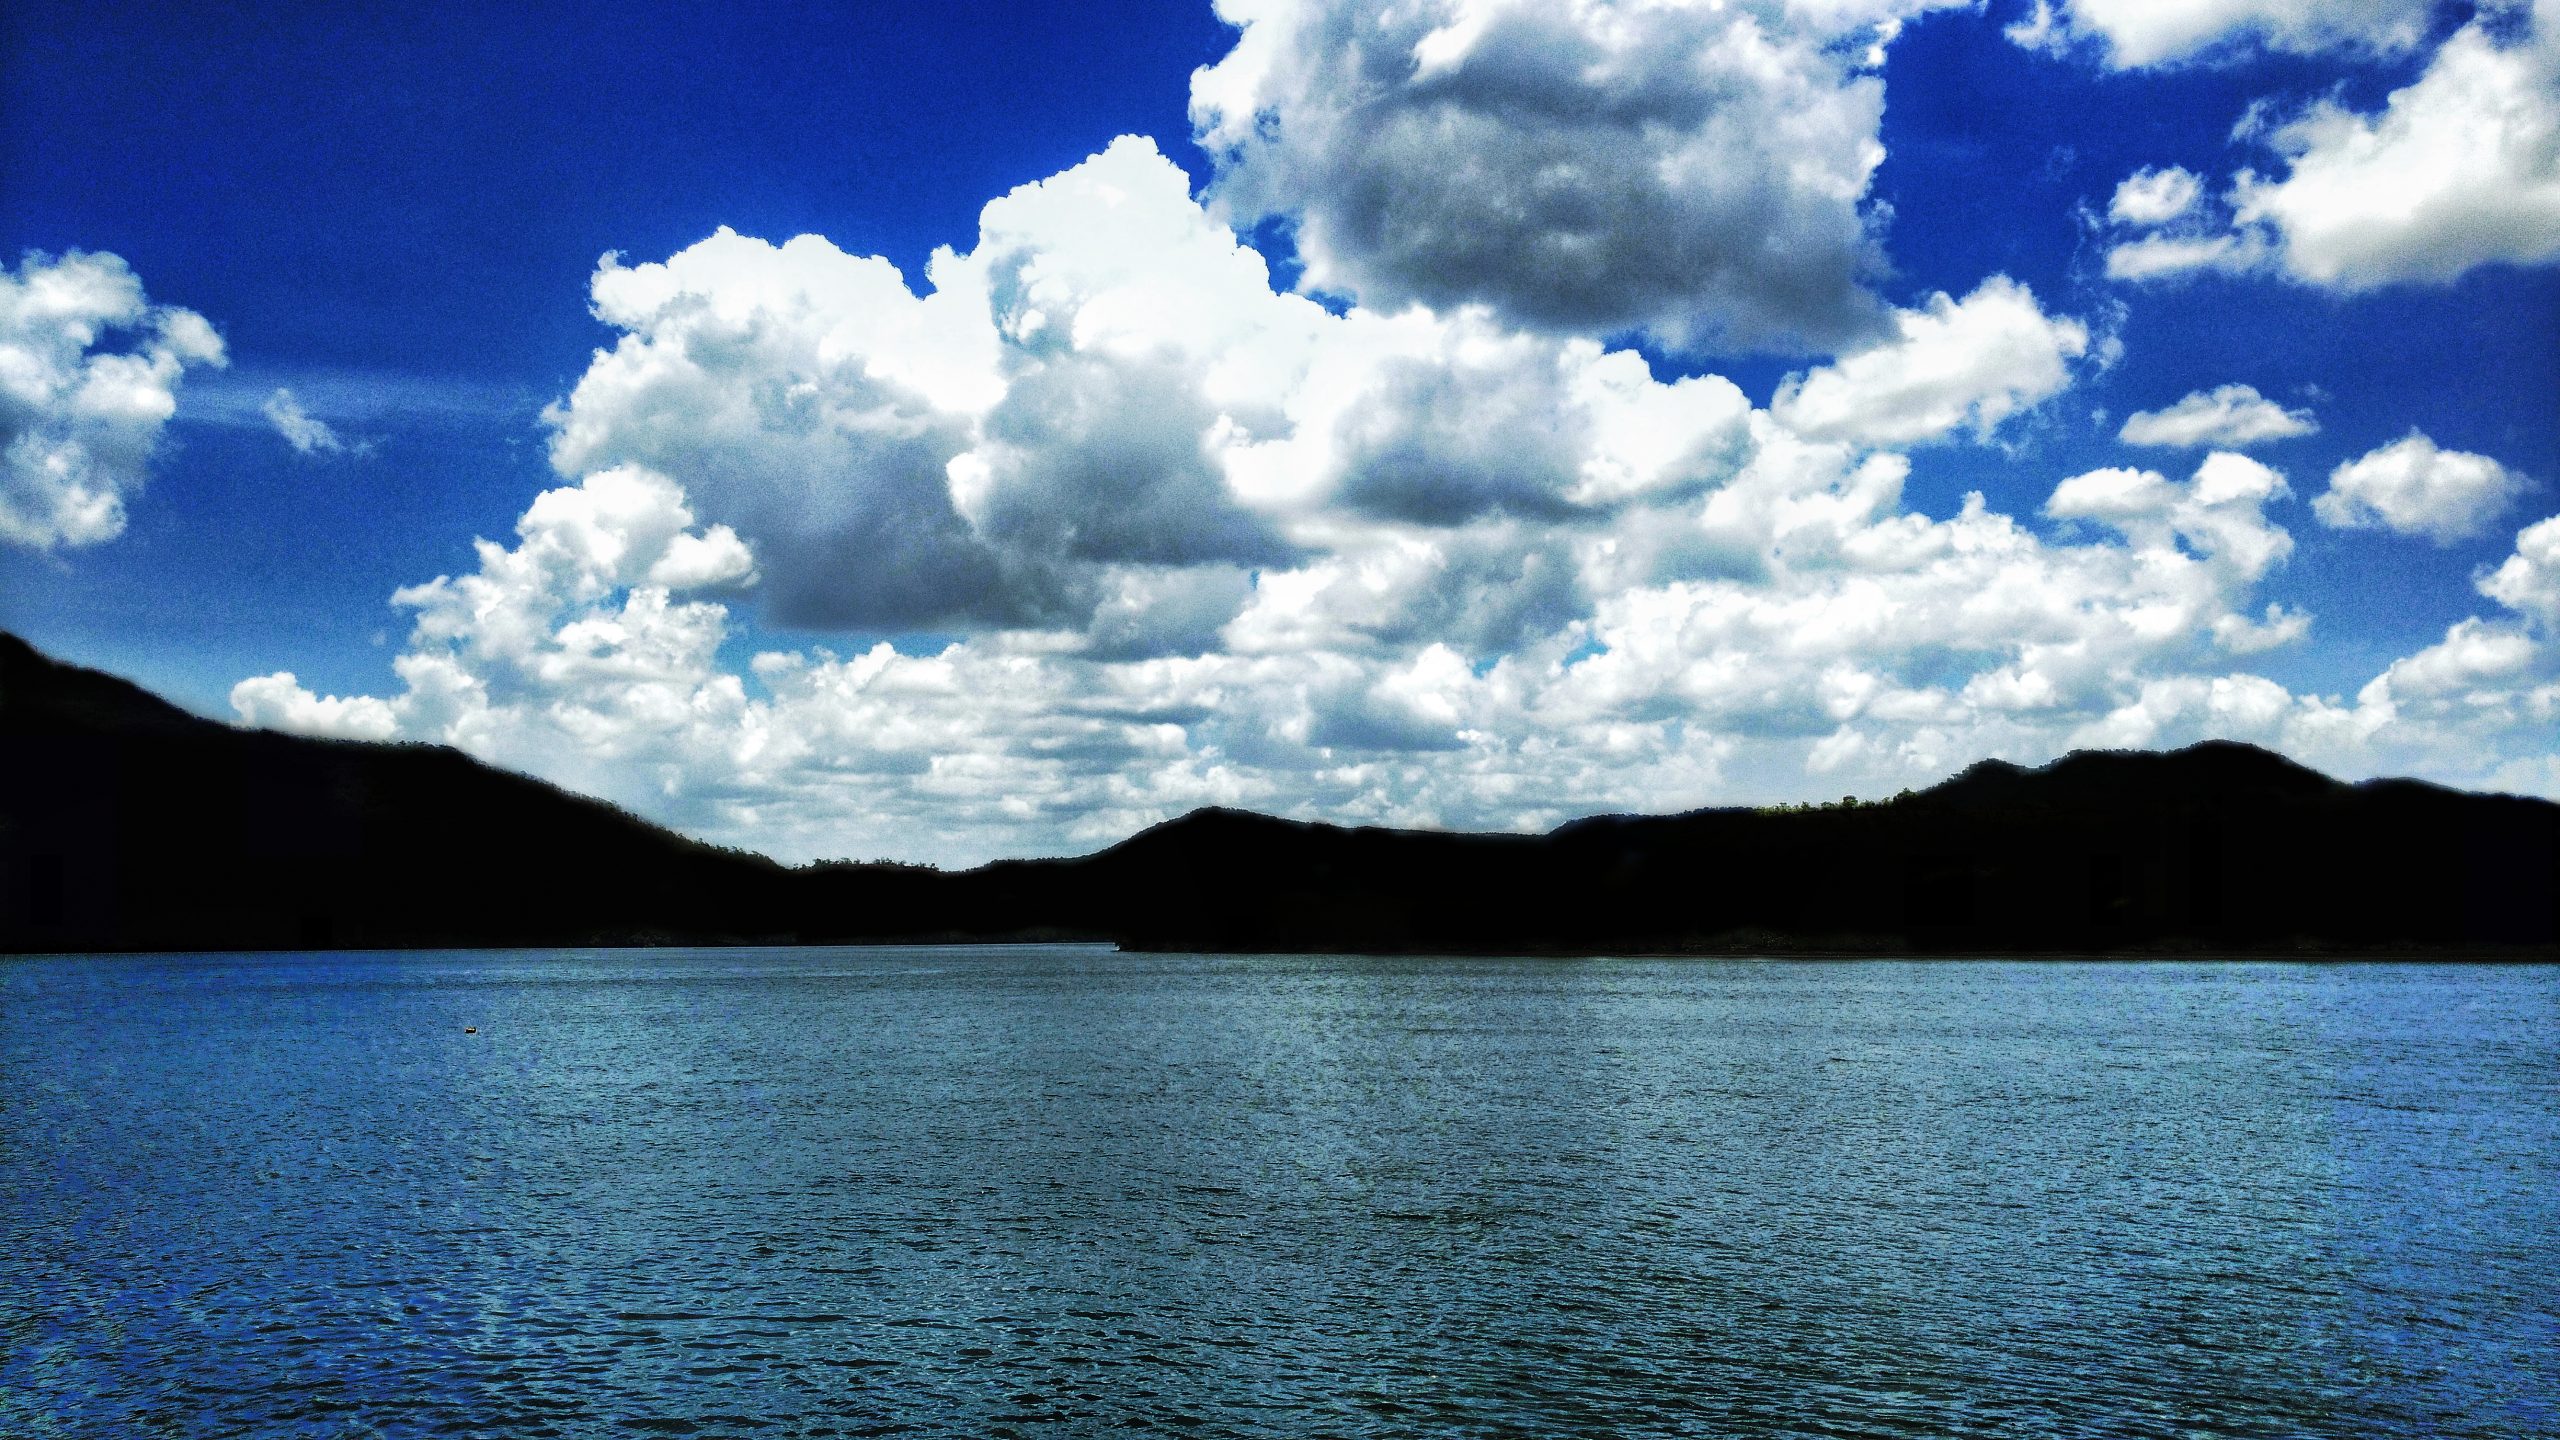 Clouds on a lake